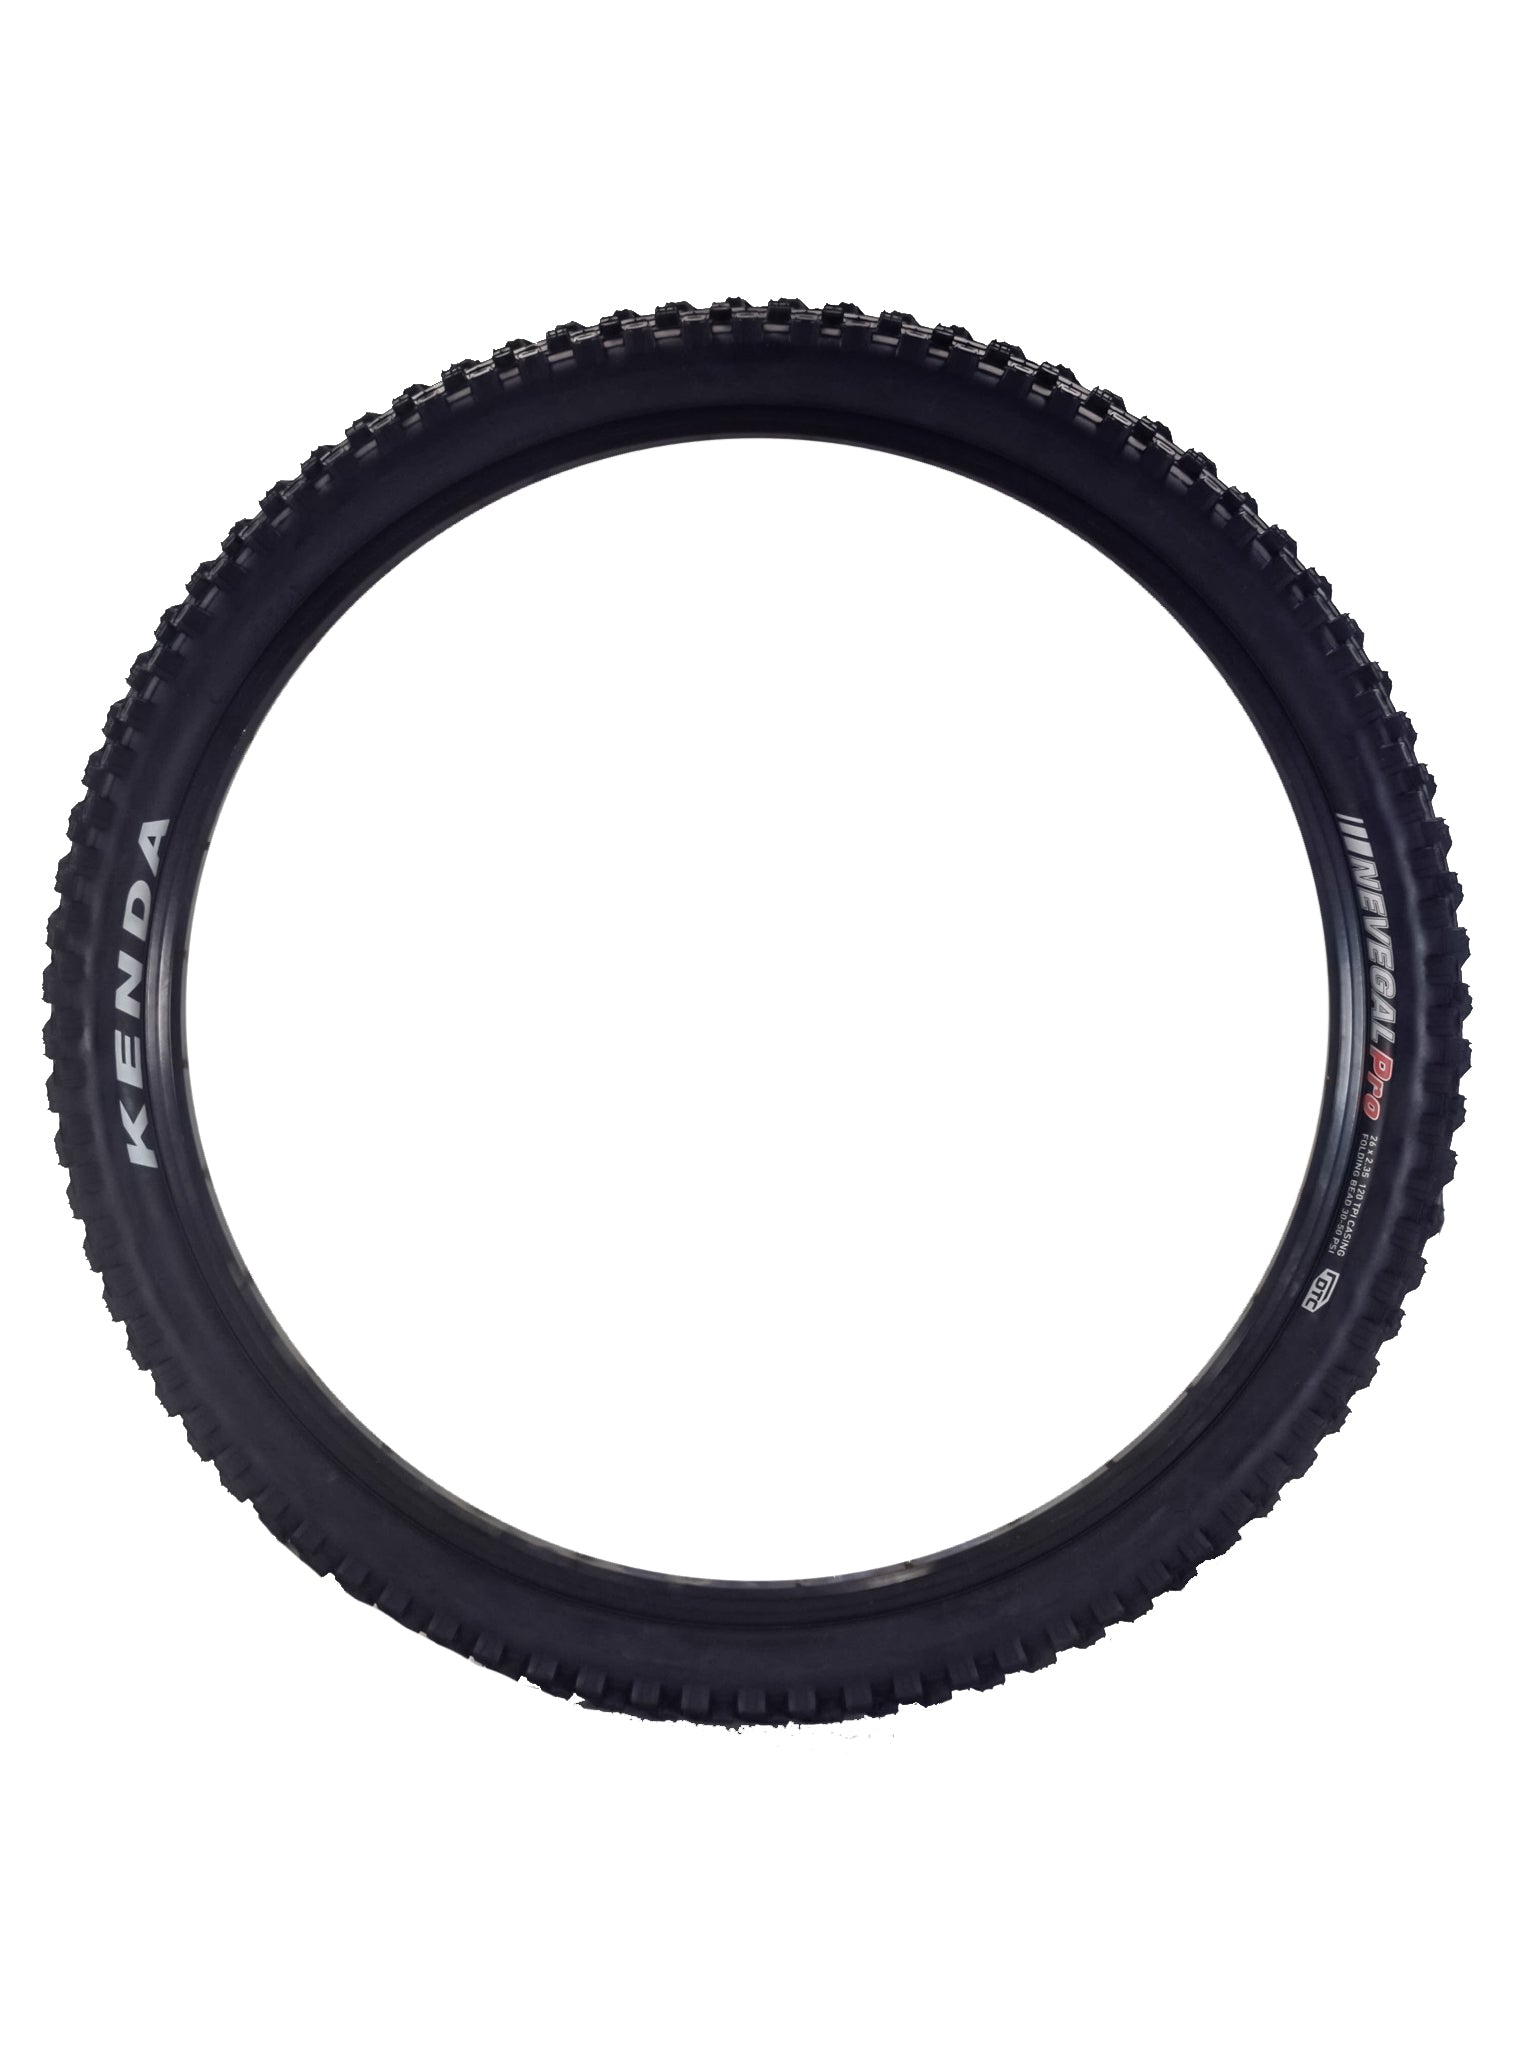 Kenda Nevegal Pro DTC 120tpi Fold 26x2.35 Gravity/DH MTB Bicycle Tire with Tube